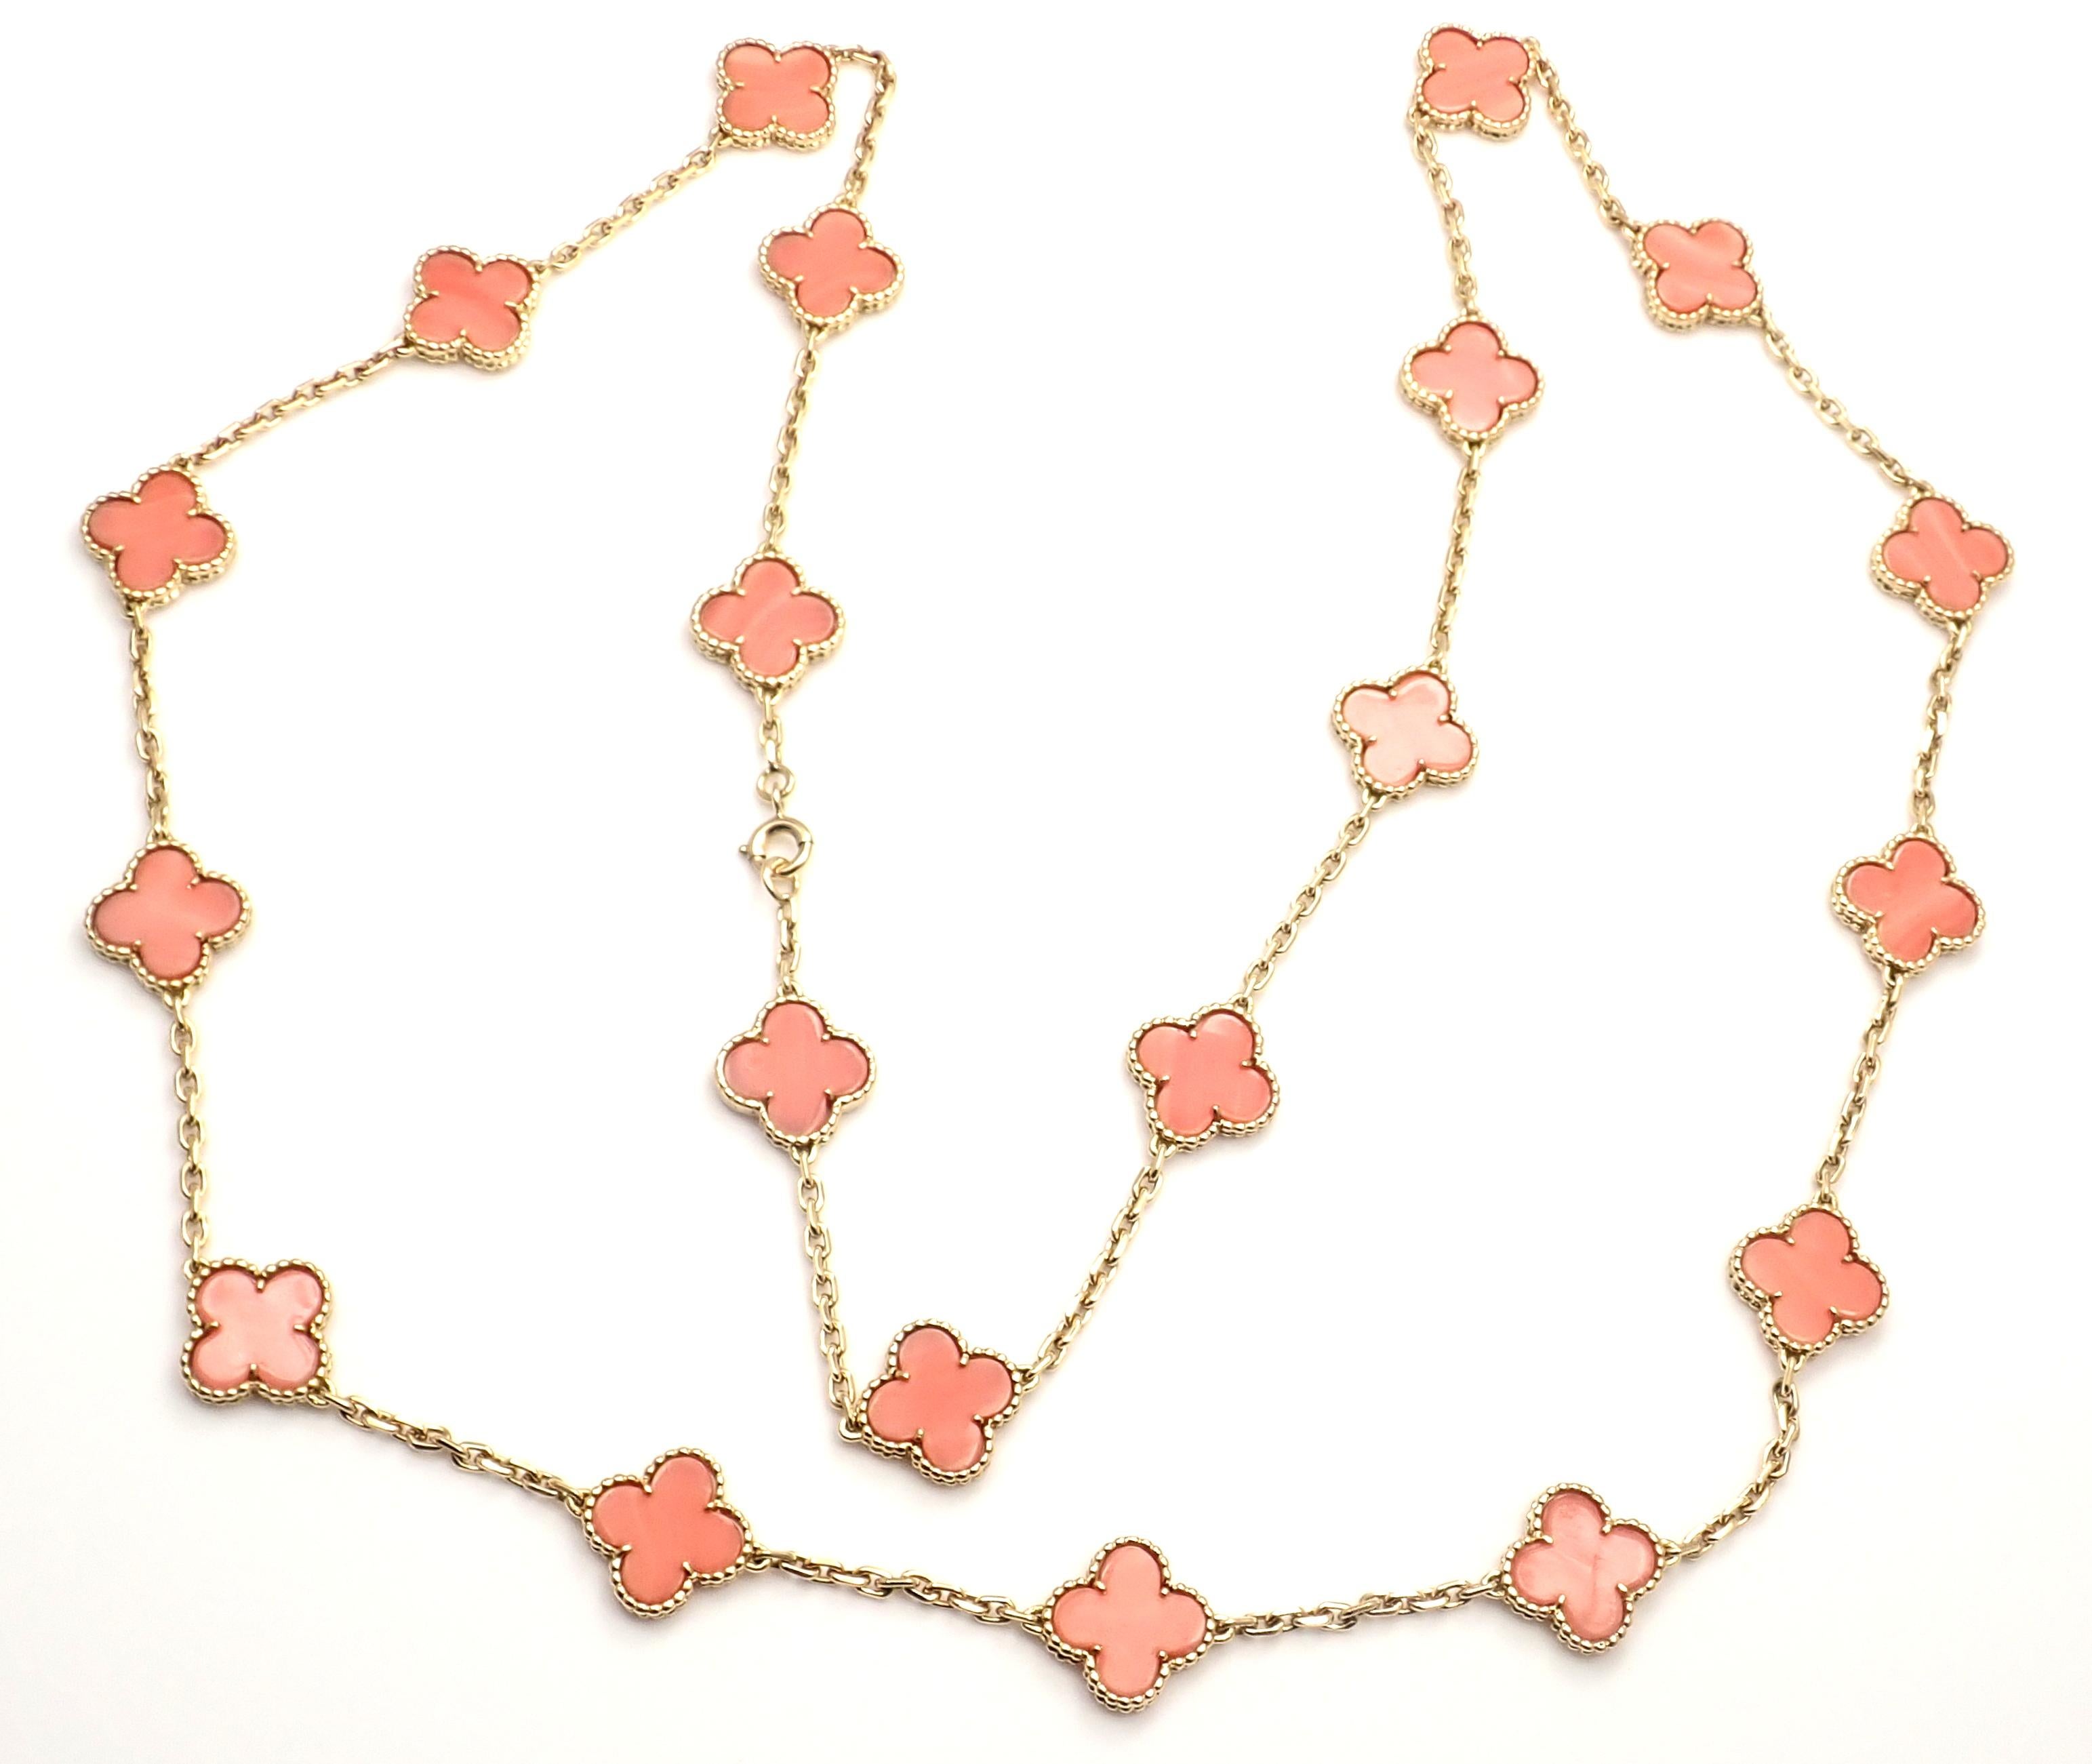 18k Yellow Gold Alhambra 20 Motifs Coral Necklace by Van Cleef & Arpels. 
With 20 motifs of coral alhambra stones 15mm each
This necklace comes with a Van Cleef & Arpels service paper and a box.
*** This is an extremely rare, early, highly